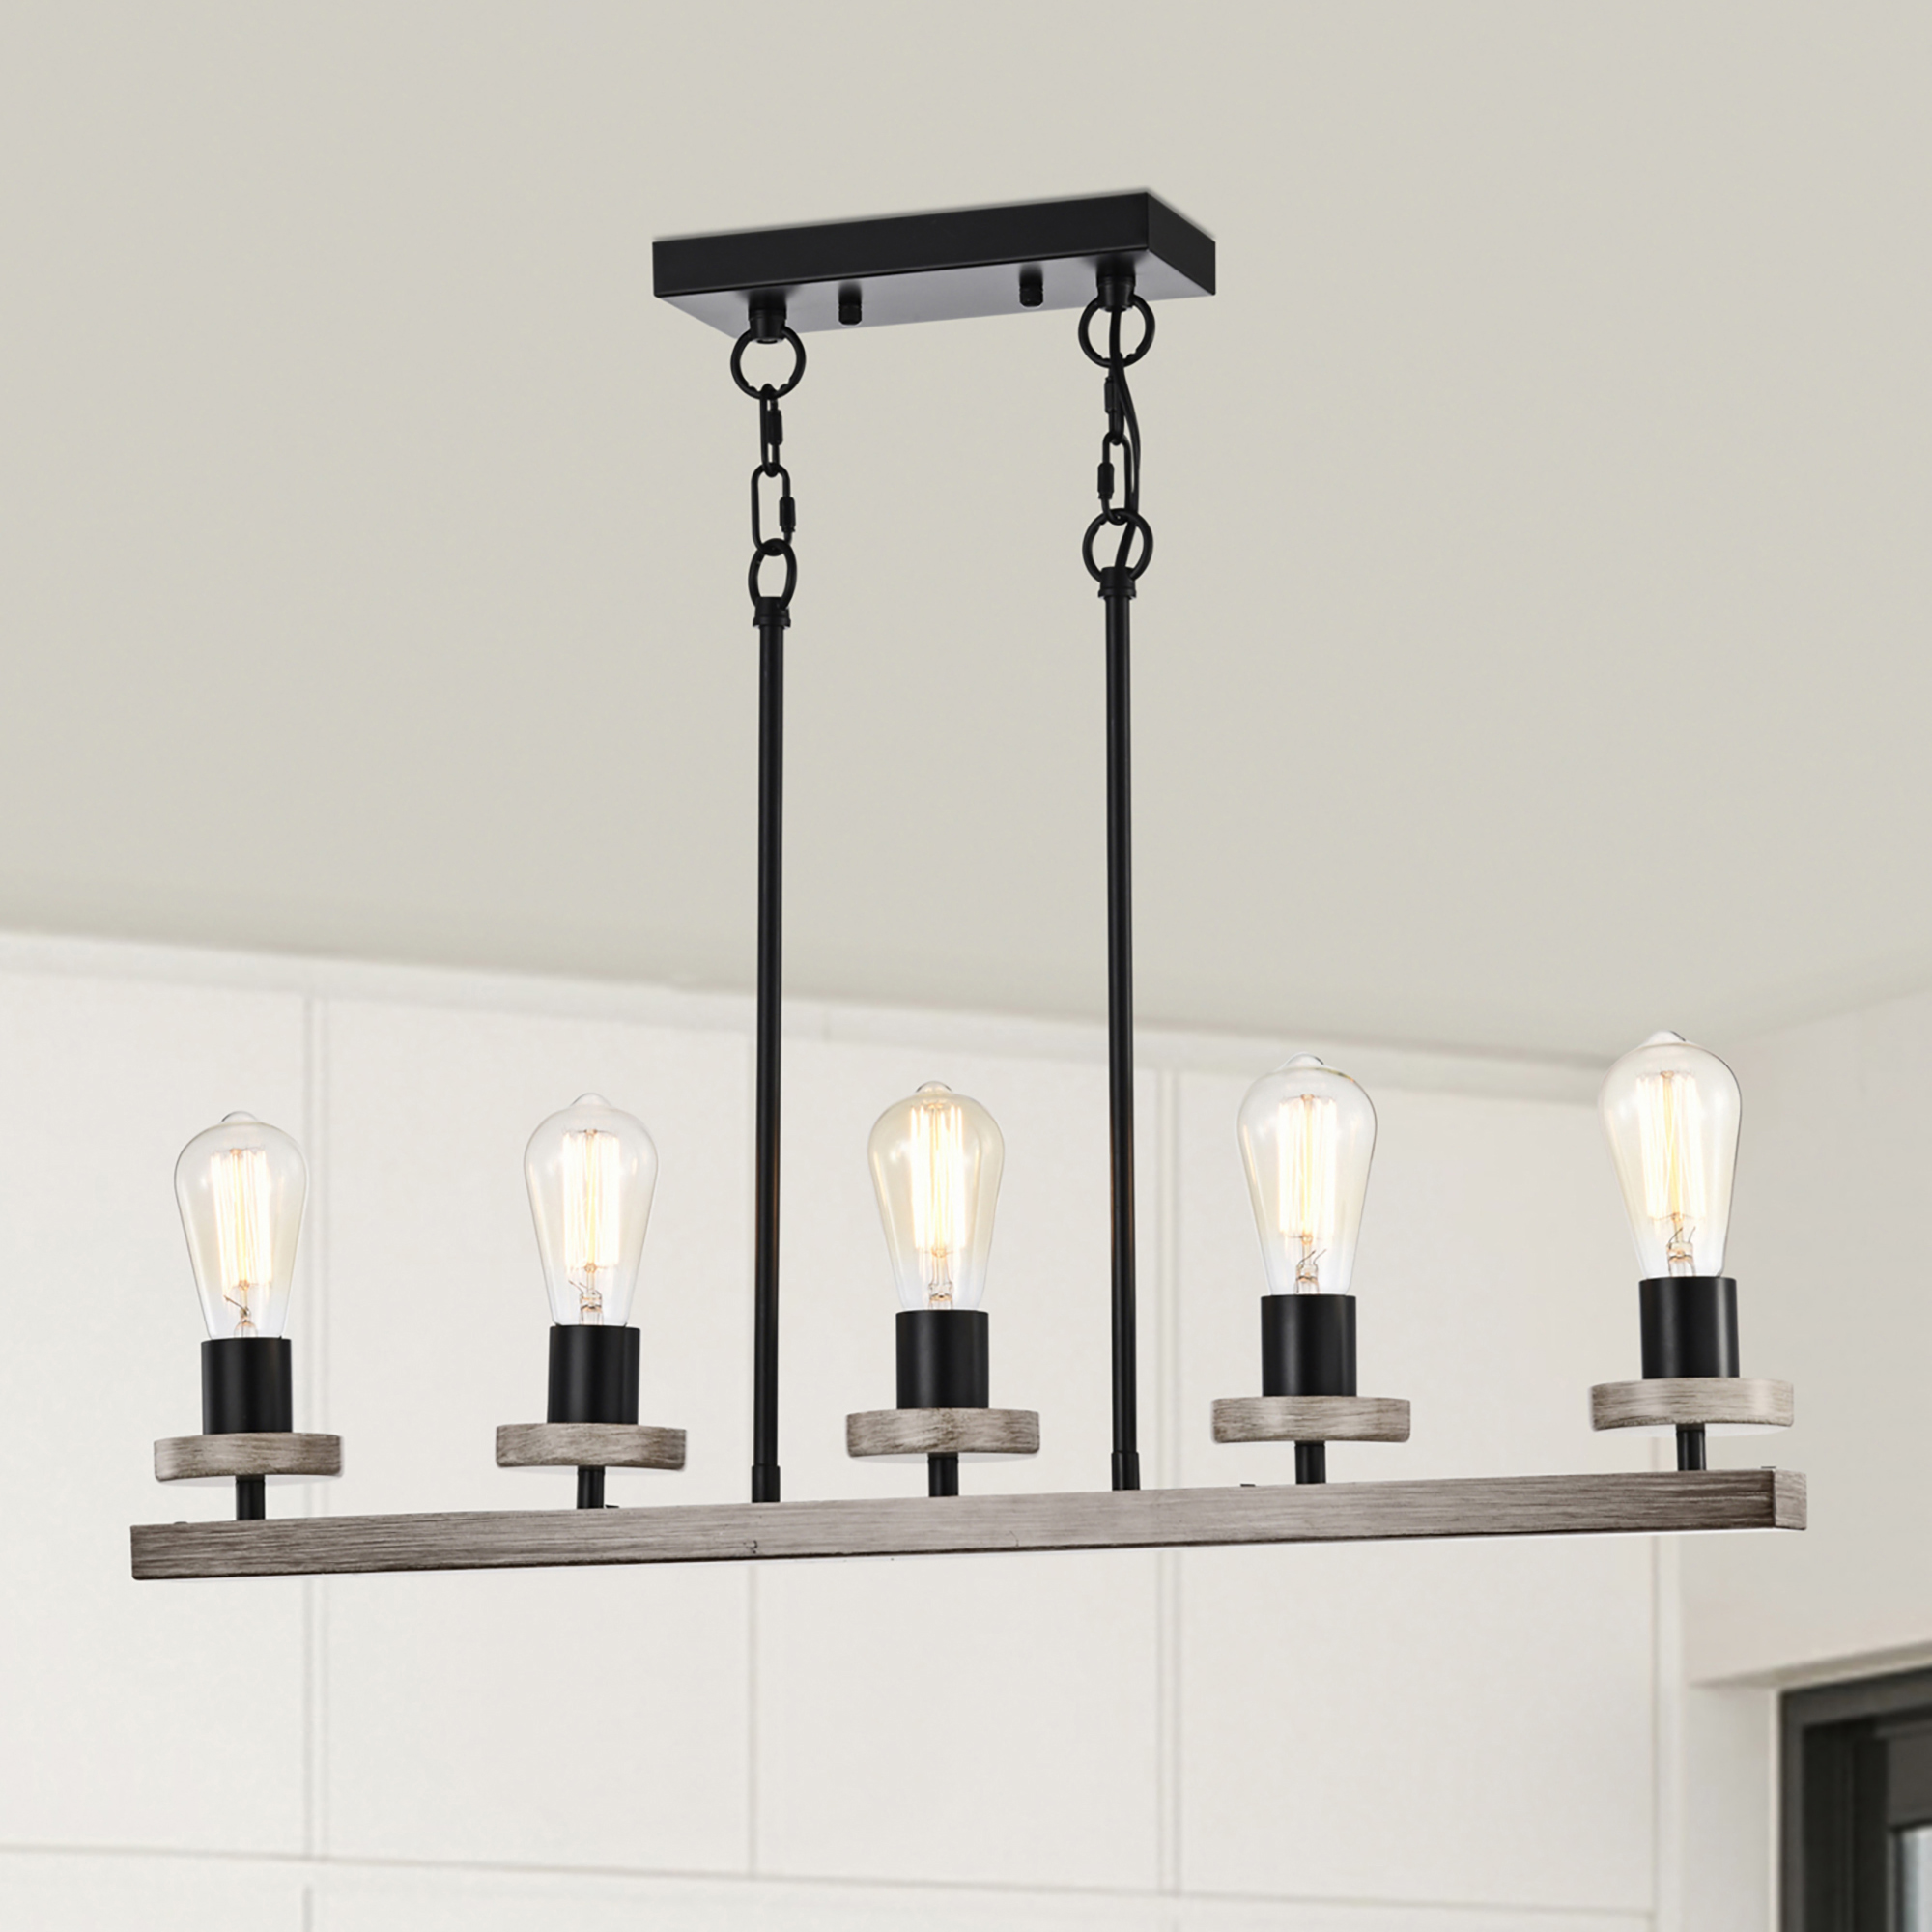 Funa 30 in. 5-Light Indoor Matte Black and Faux Wood Grain Finish Chandelier with Light Kit